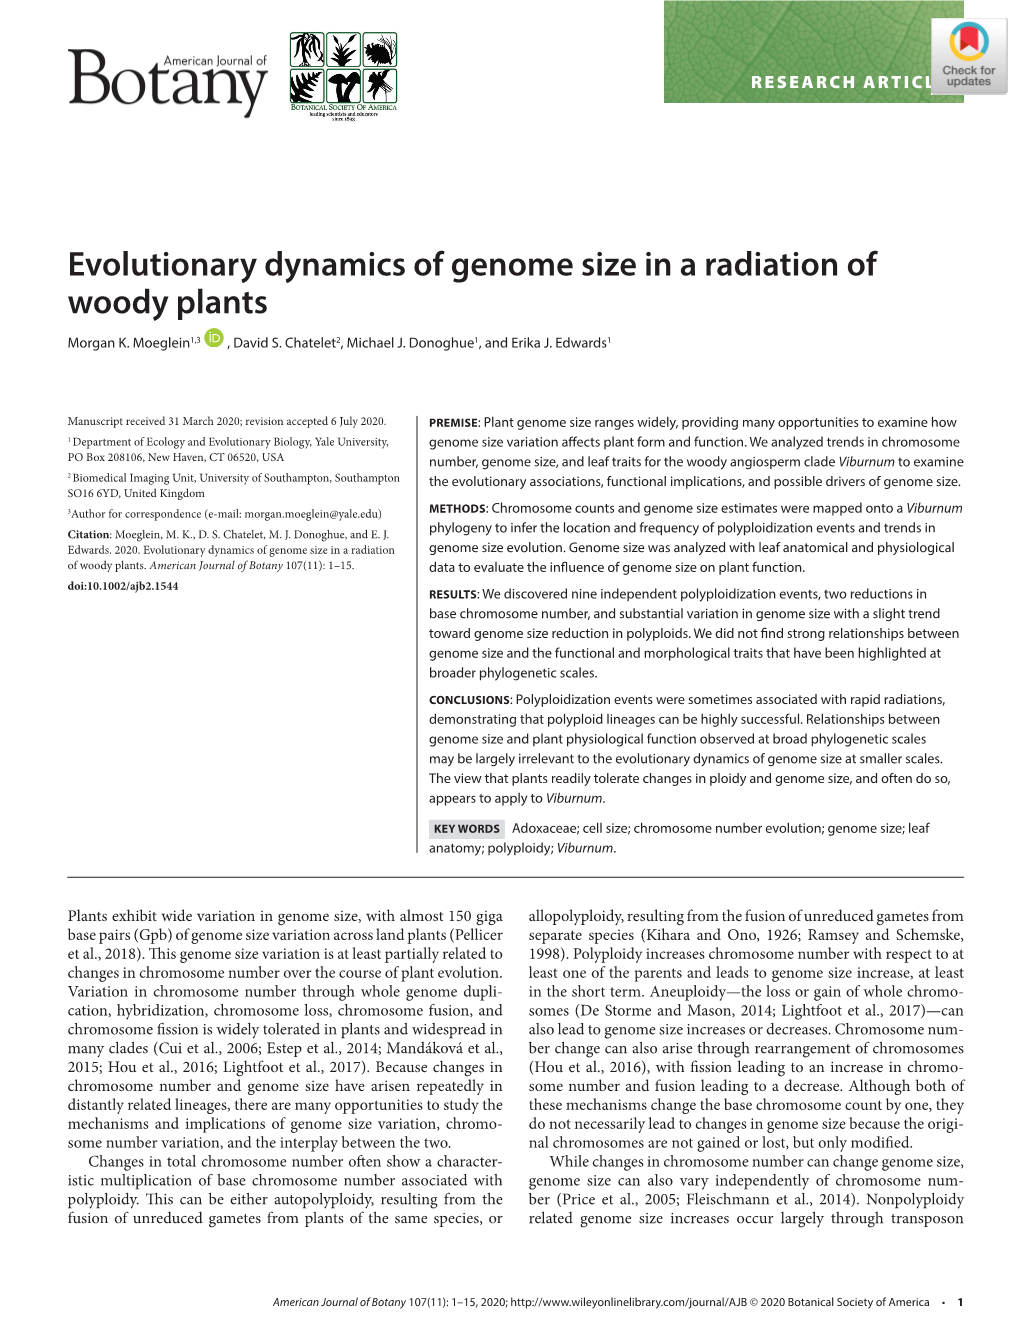 Evolutionary Dynamics of Genome Size in a Radiation of Woody Plants